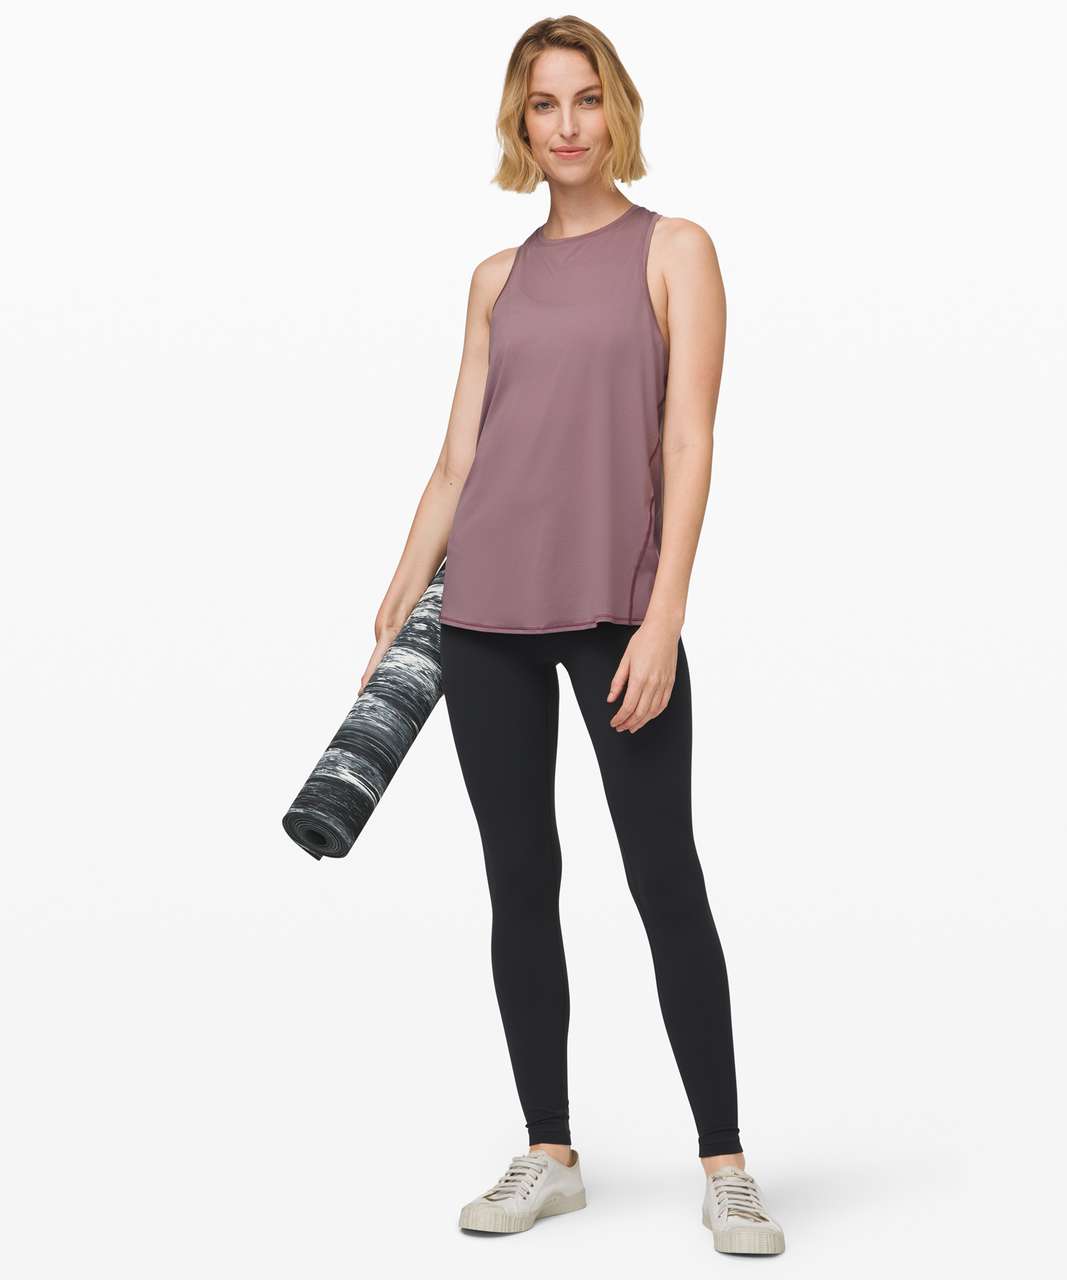 Lululemon All Tied Up Tank *No-stink Zinc - Frosted Mulberry